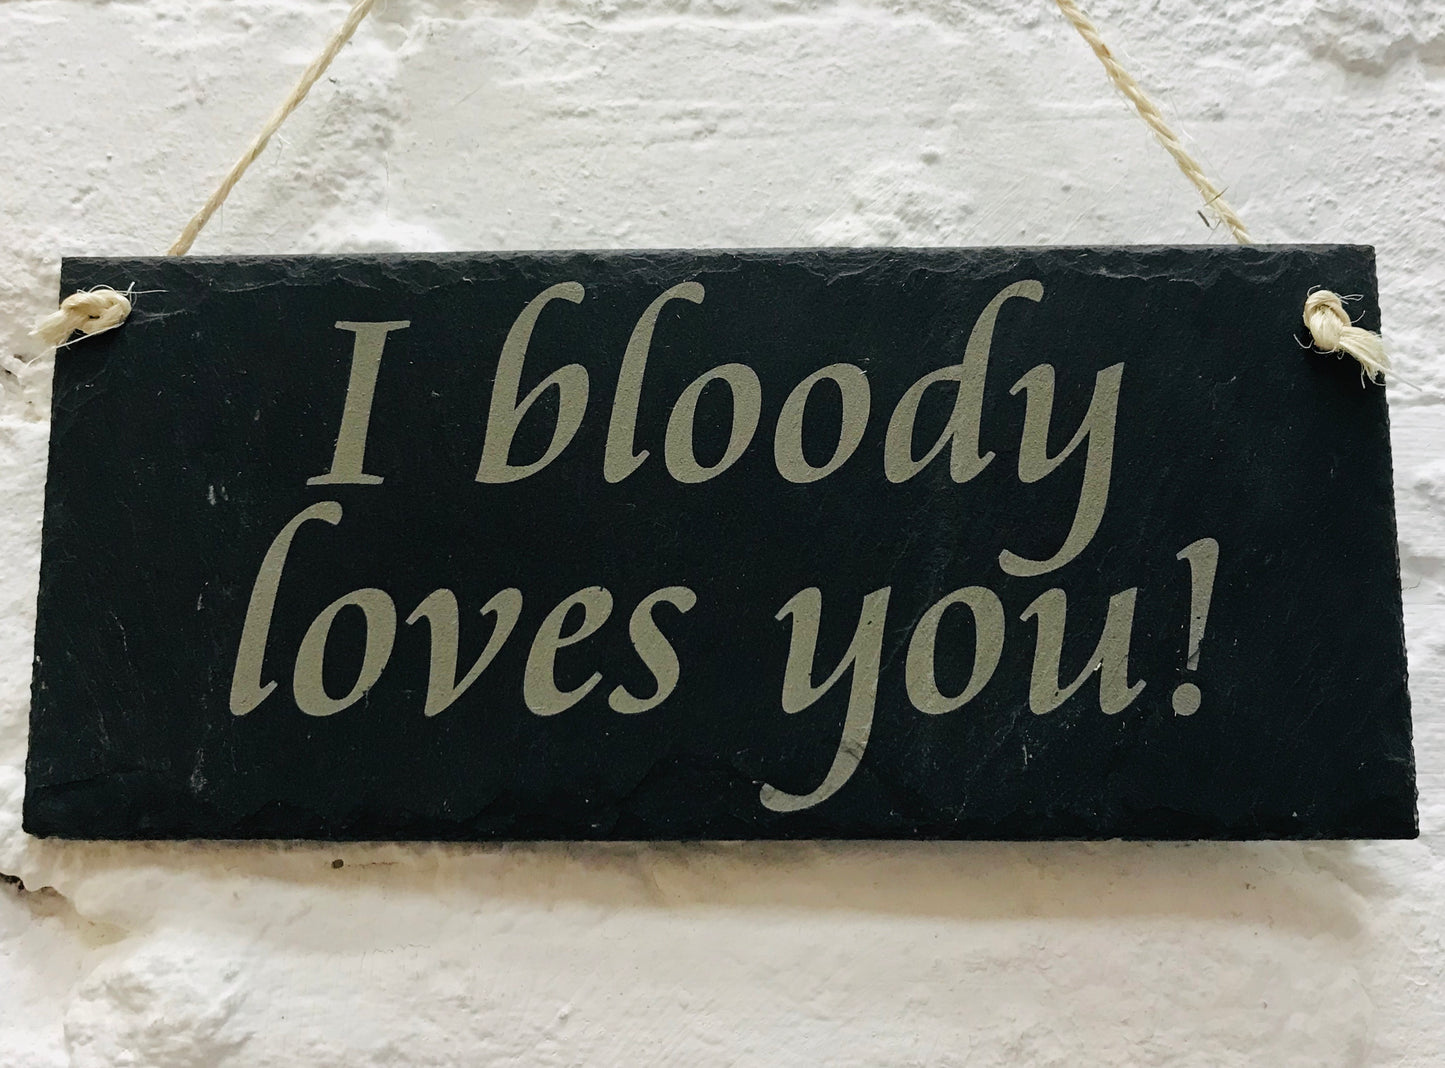 Slate ‘I Bloody Loves You’ sign